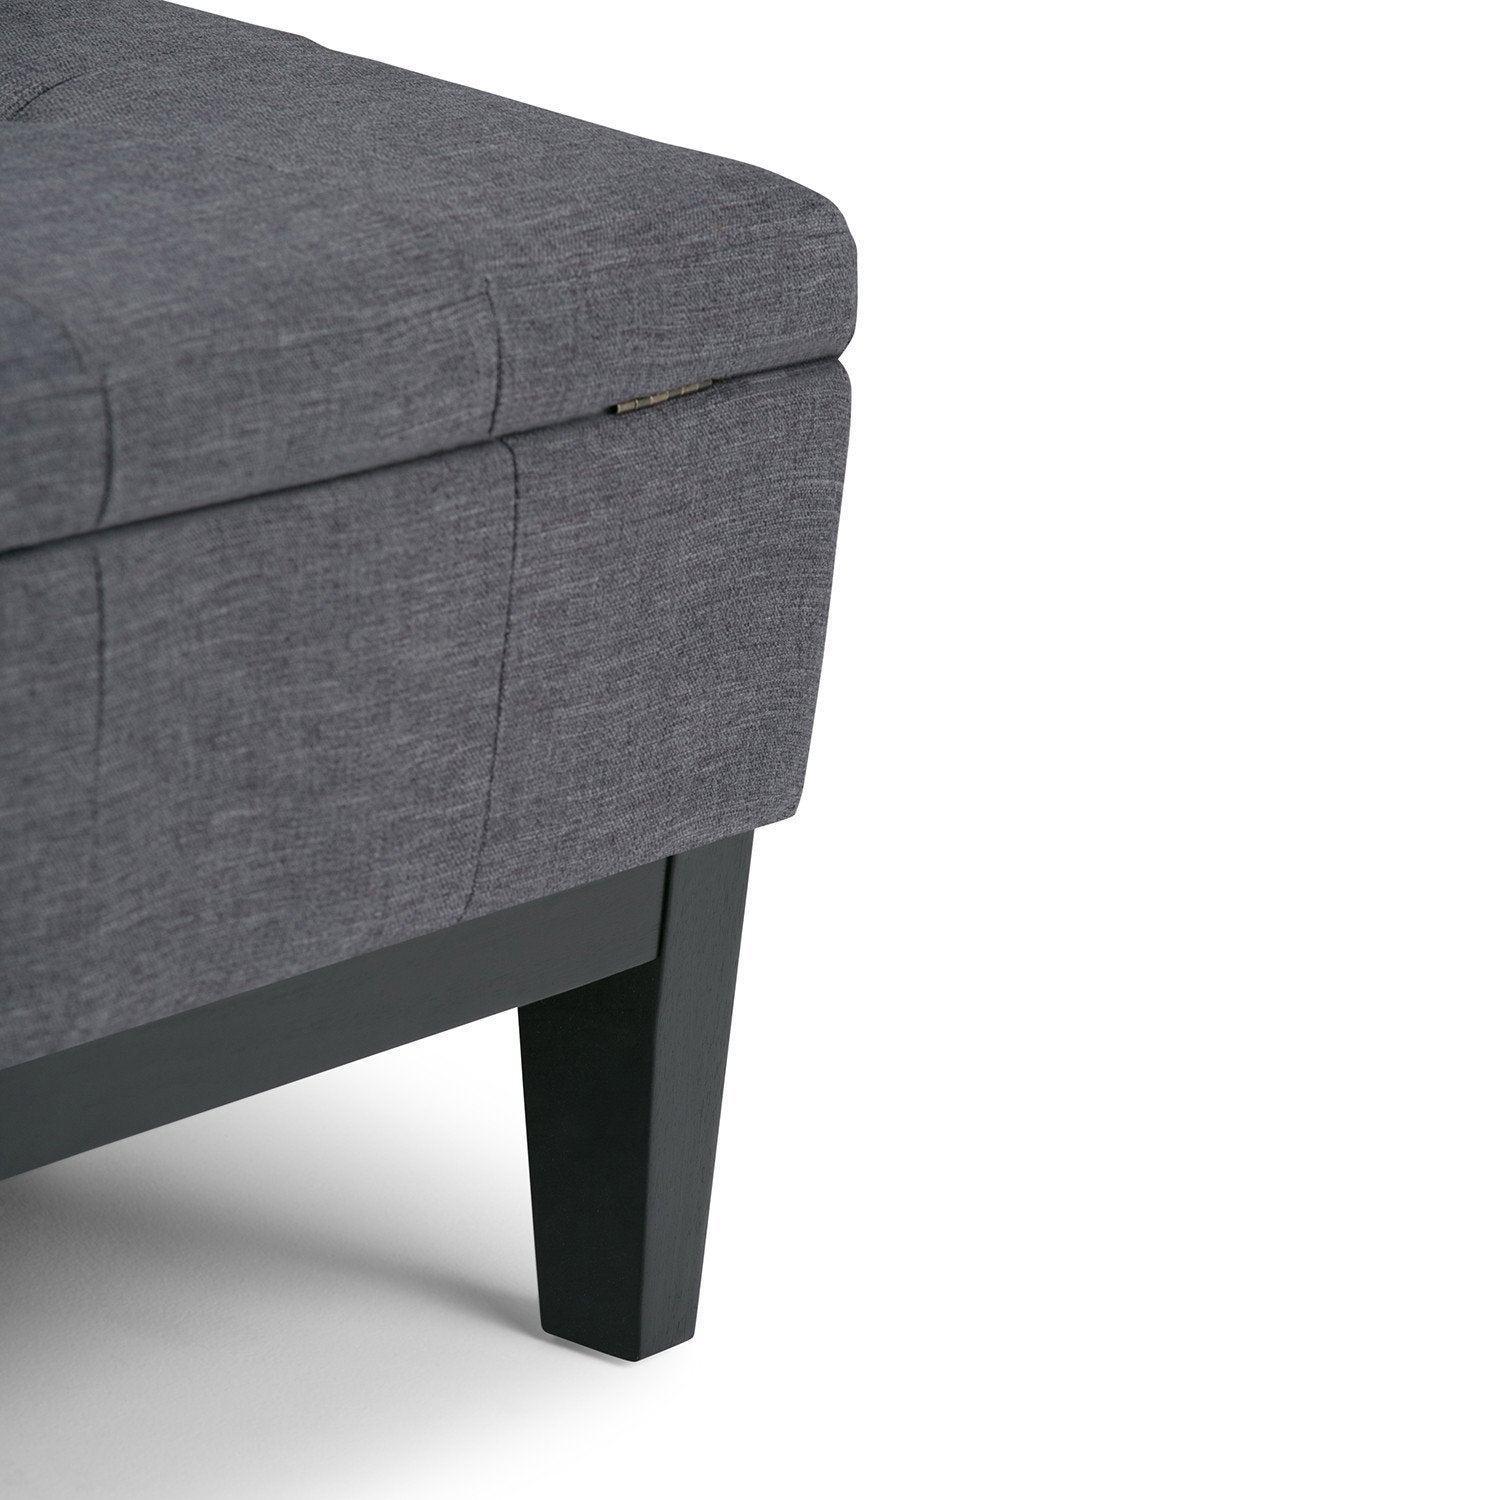 Slate Grey Linen Style Fabric | Dover Square Vegan Leather Coffee Table Storage Ottoman